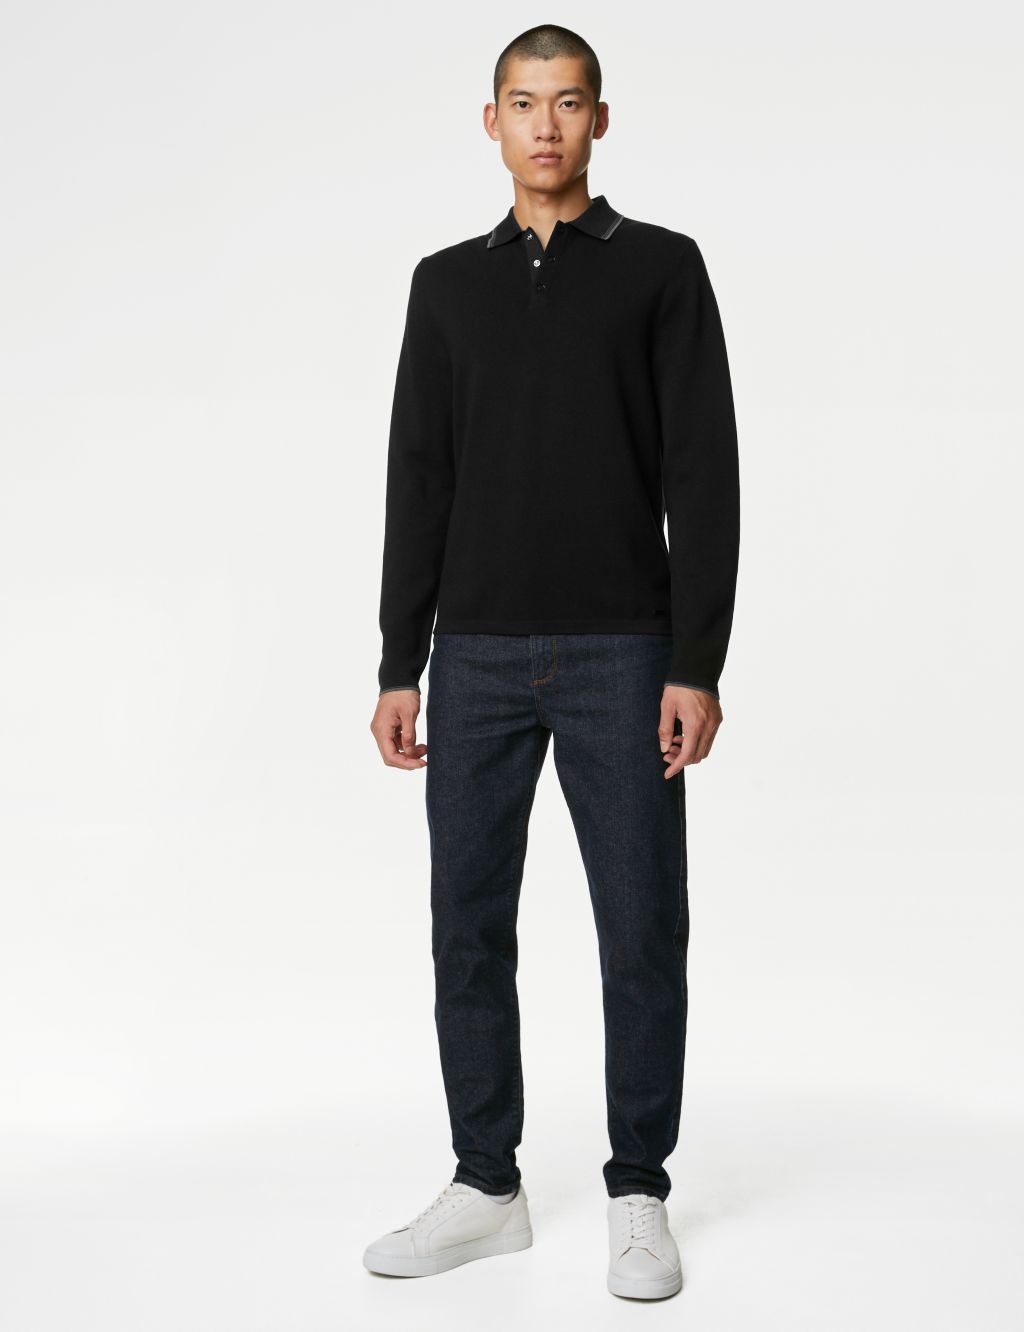 Men’s Long-sleeved Knitted Polo Shirts | M&S